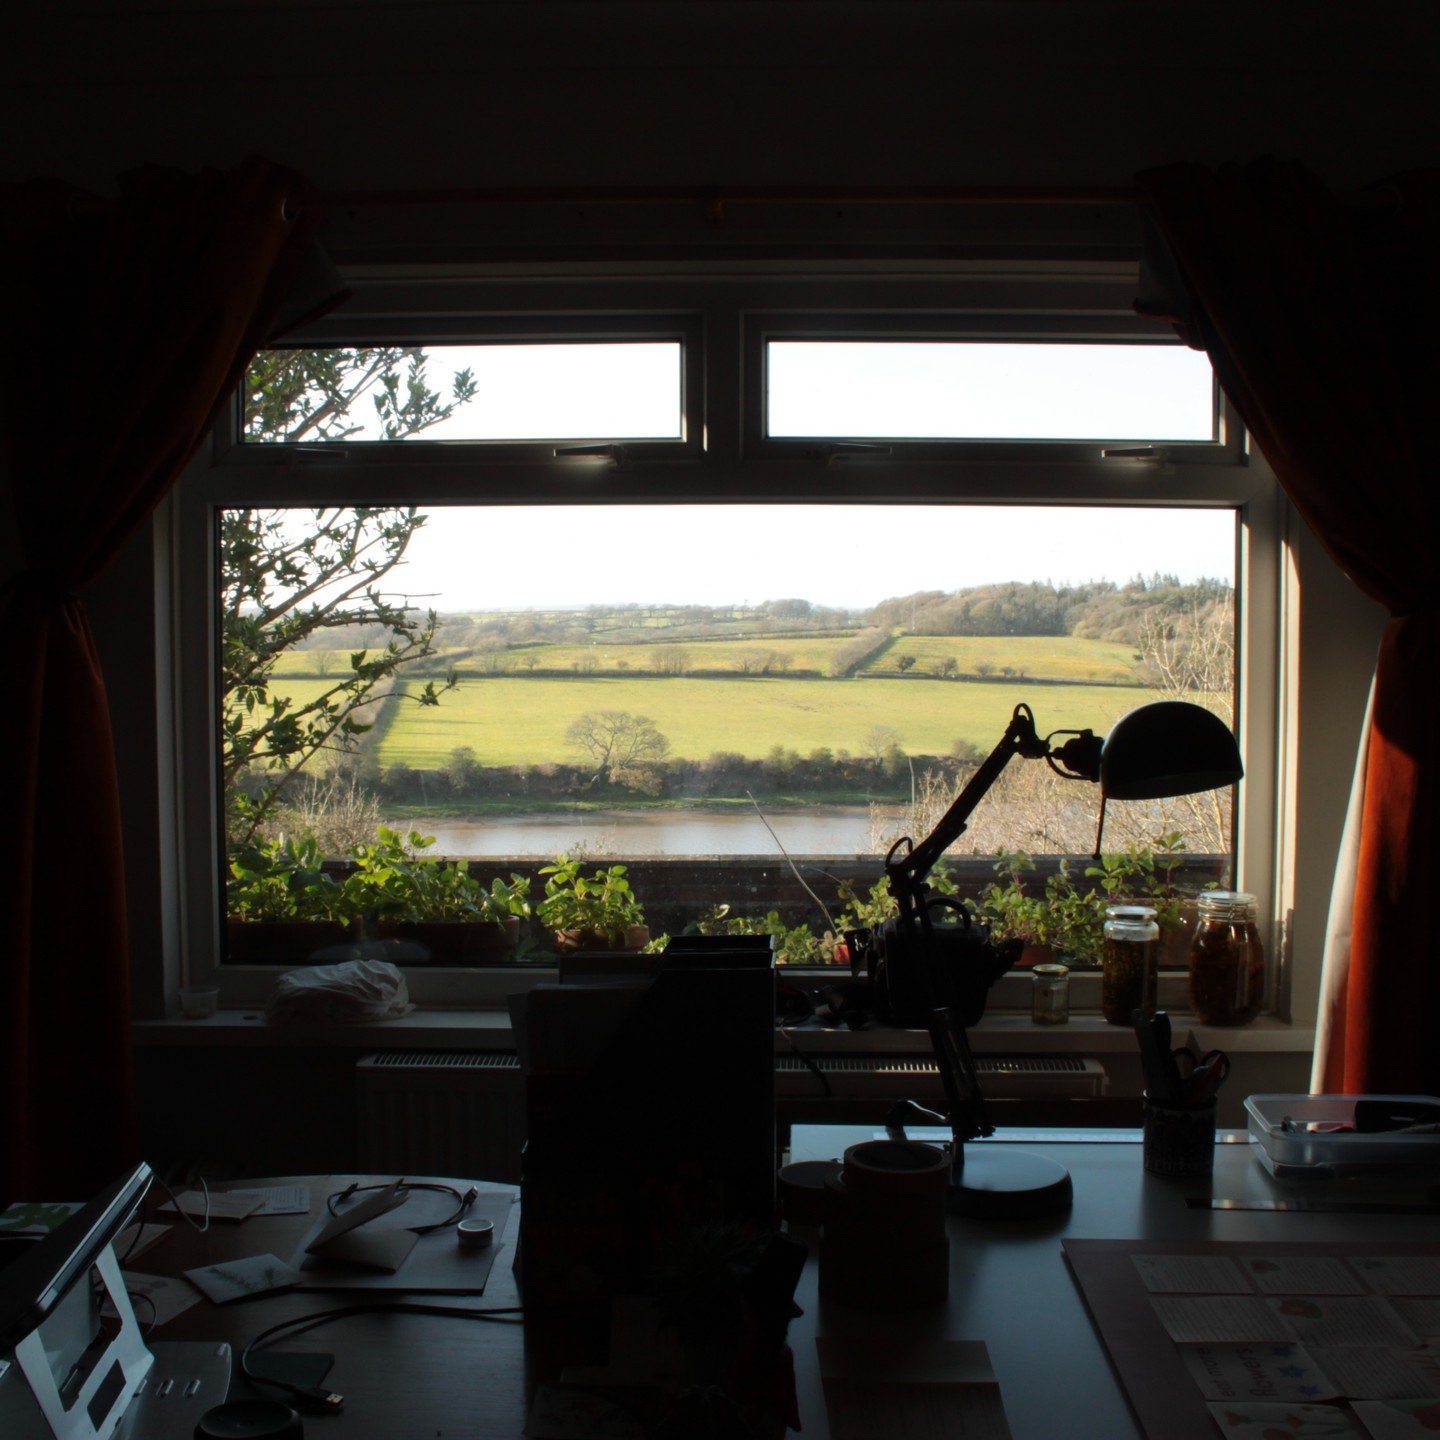 I'm very lucky to have this view of the Cleddau river from my studio, and lemon balm and peppermint plants on the windowsill which I harvest for tea 💚

#cleddauriver #pembrokeshire #westwales #lemonbalm #peppermint #workspace #studiospace #workshop 